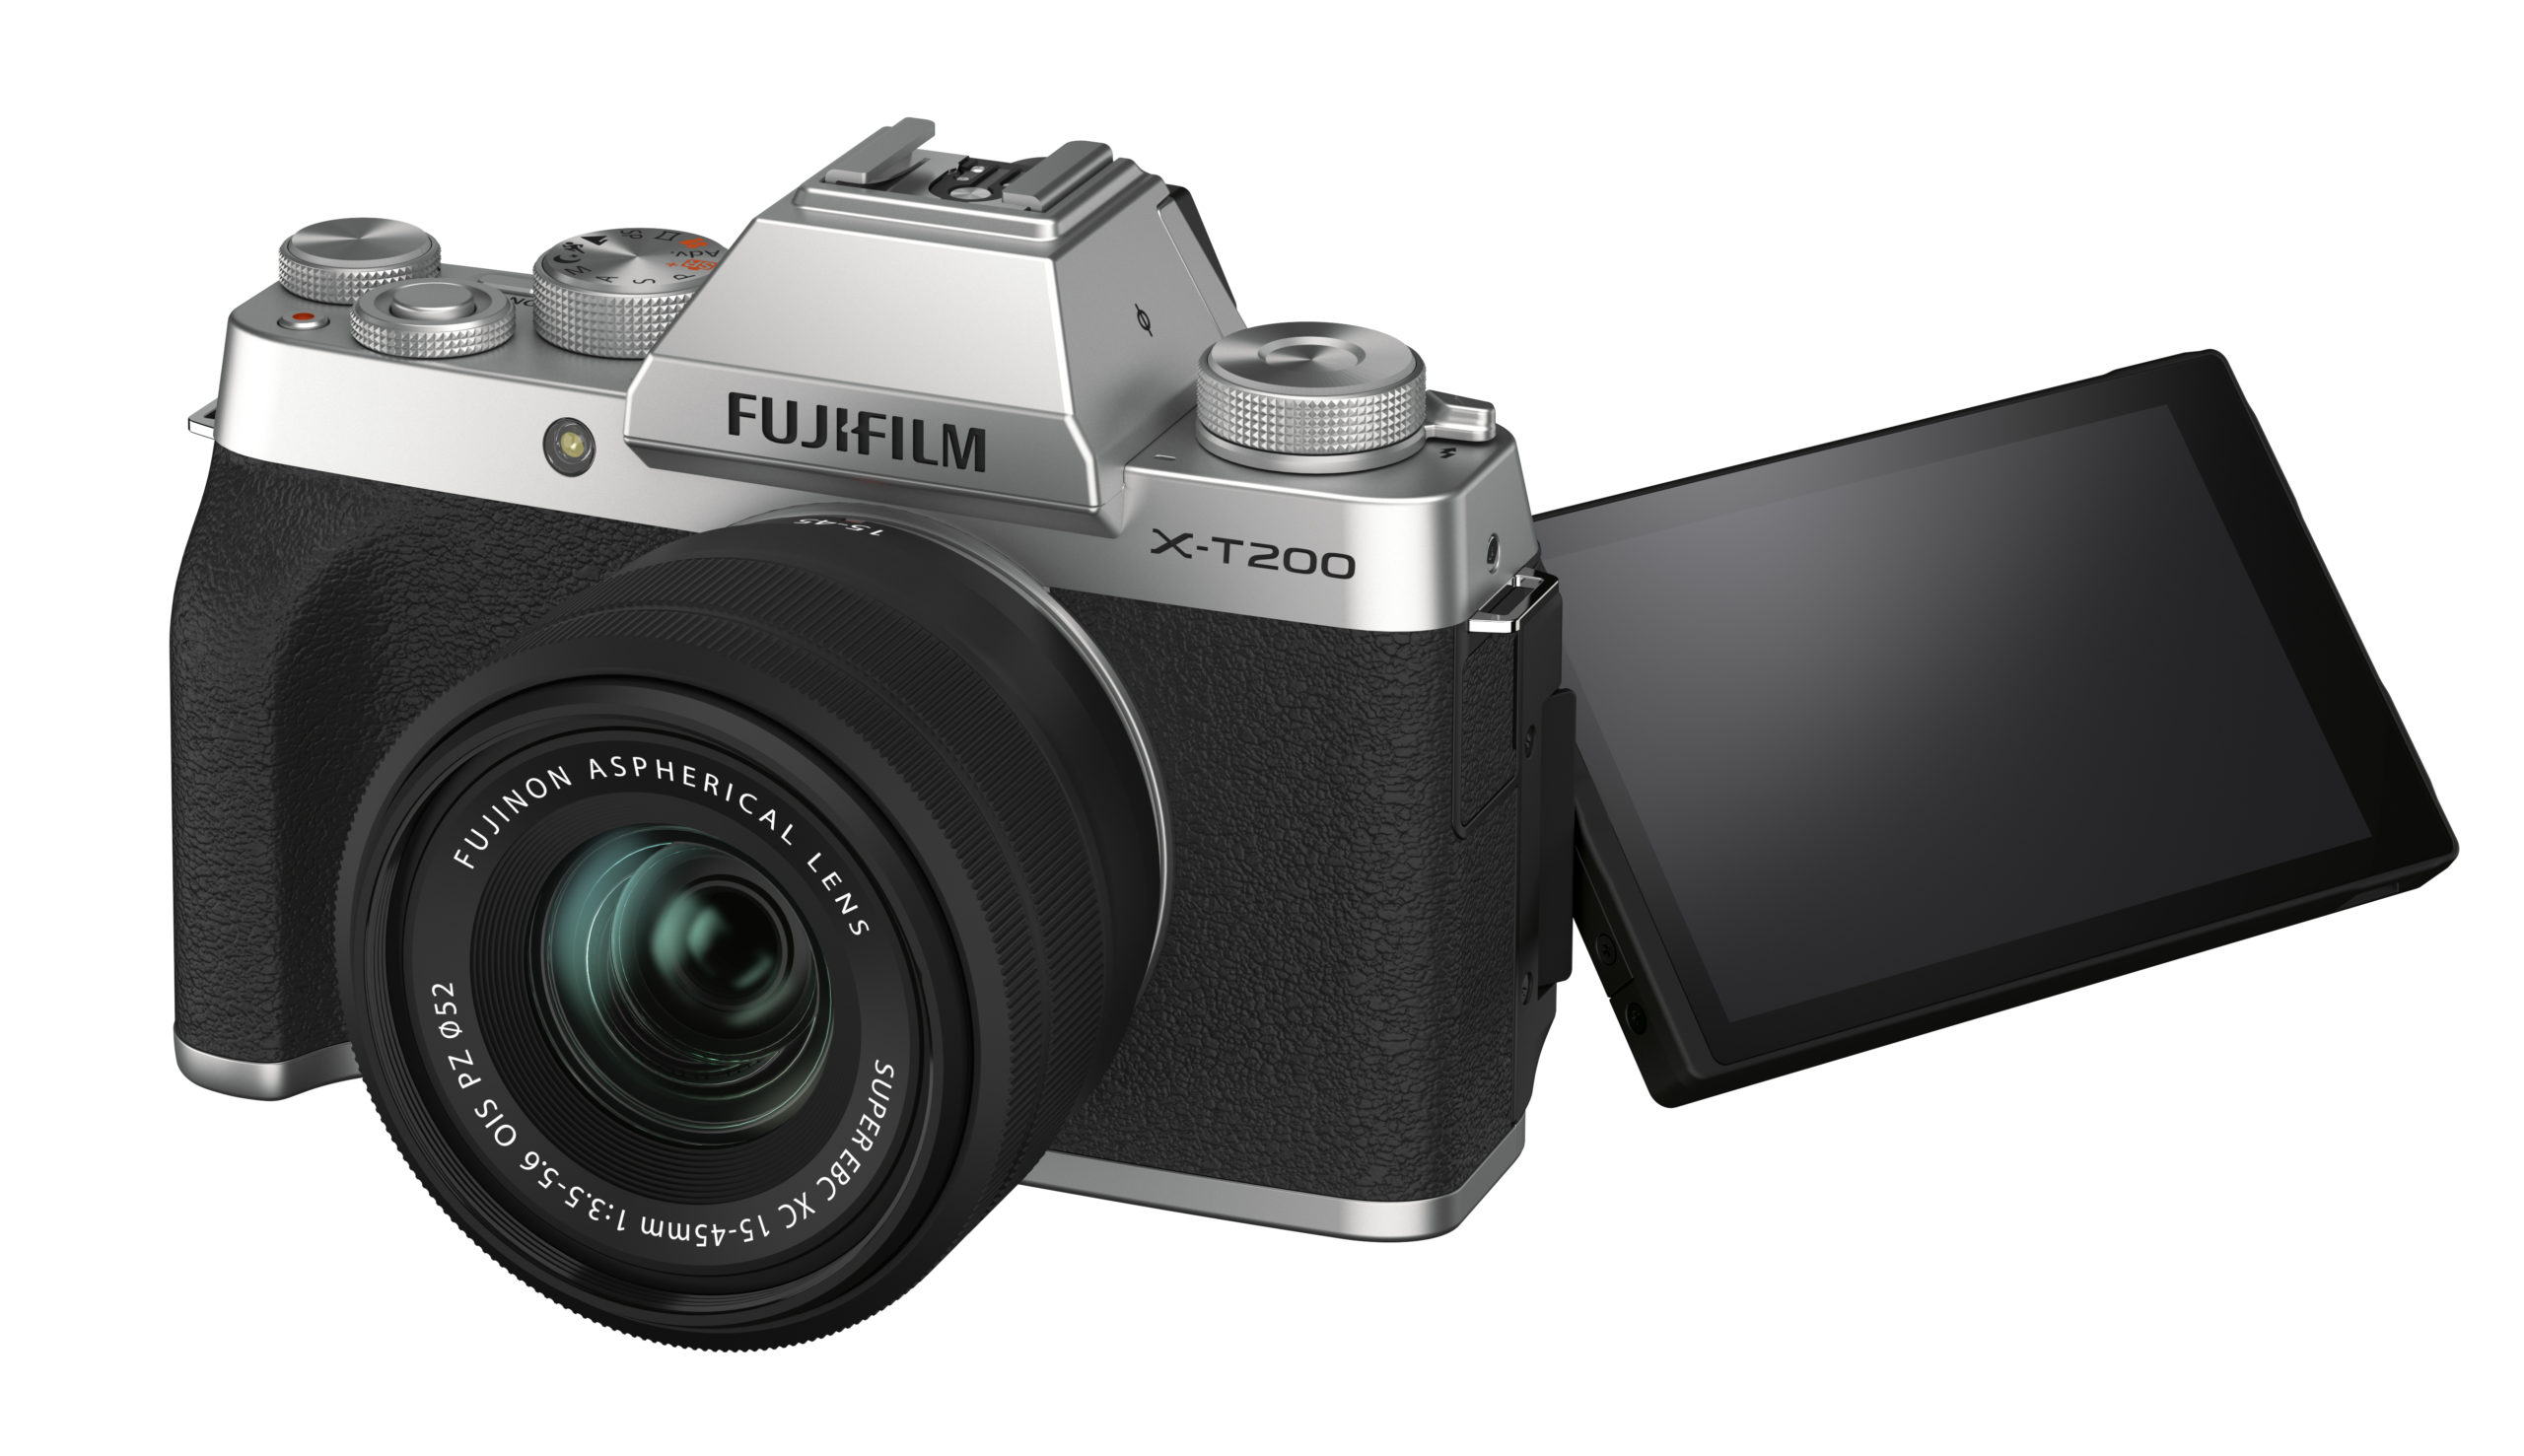 The Fujifilm X-T200 Has a “Digital Gimbal” Inside (And There’s More!)